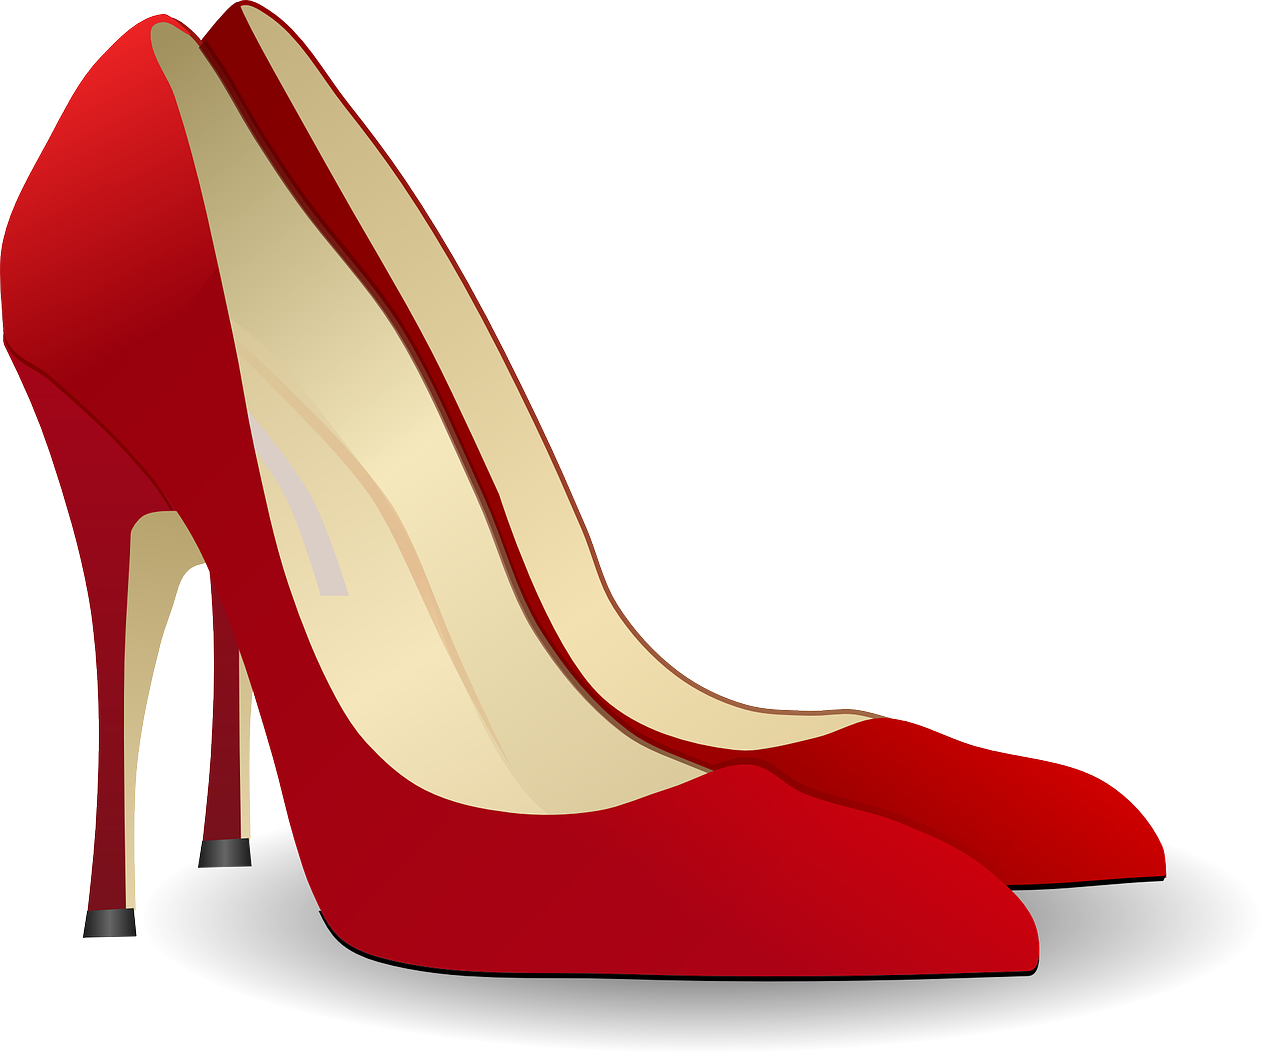 Are High Heels Safe For Your Feet? | Syracuse Podiatry - Dr. Ryan D'Amico